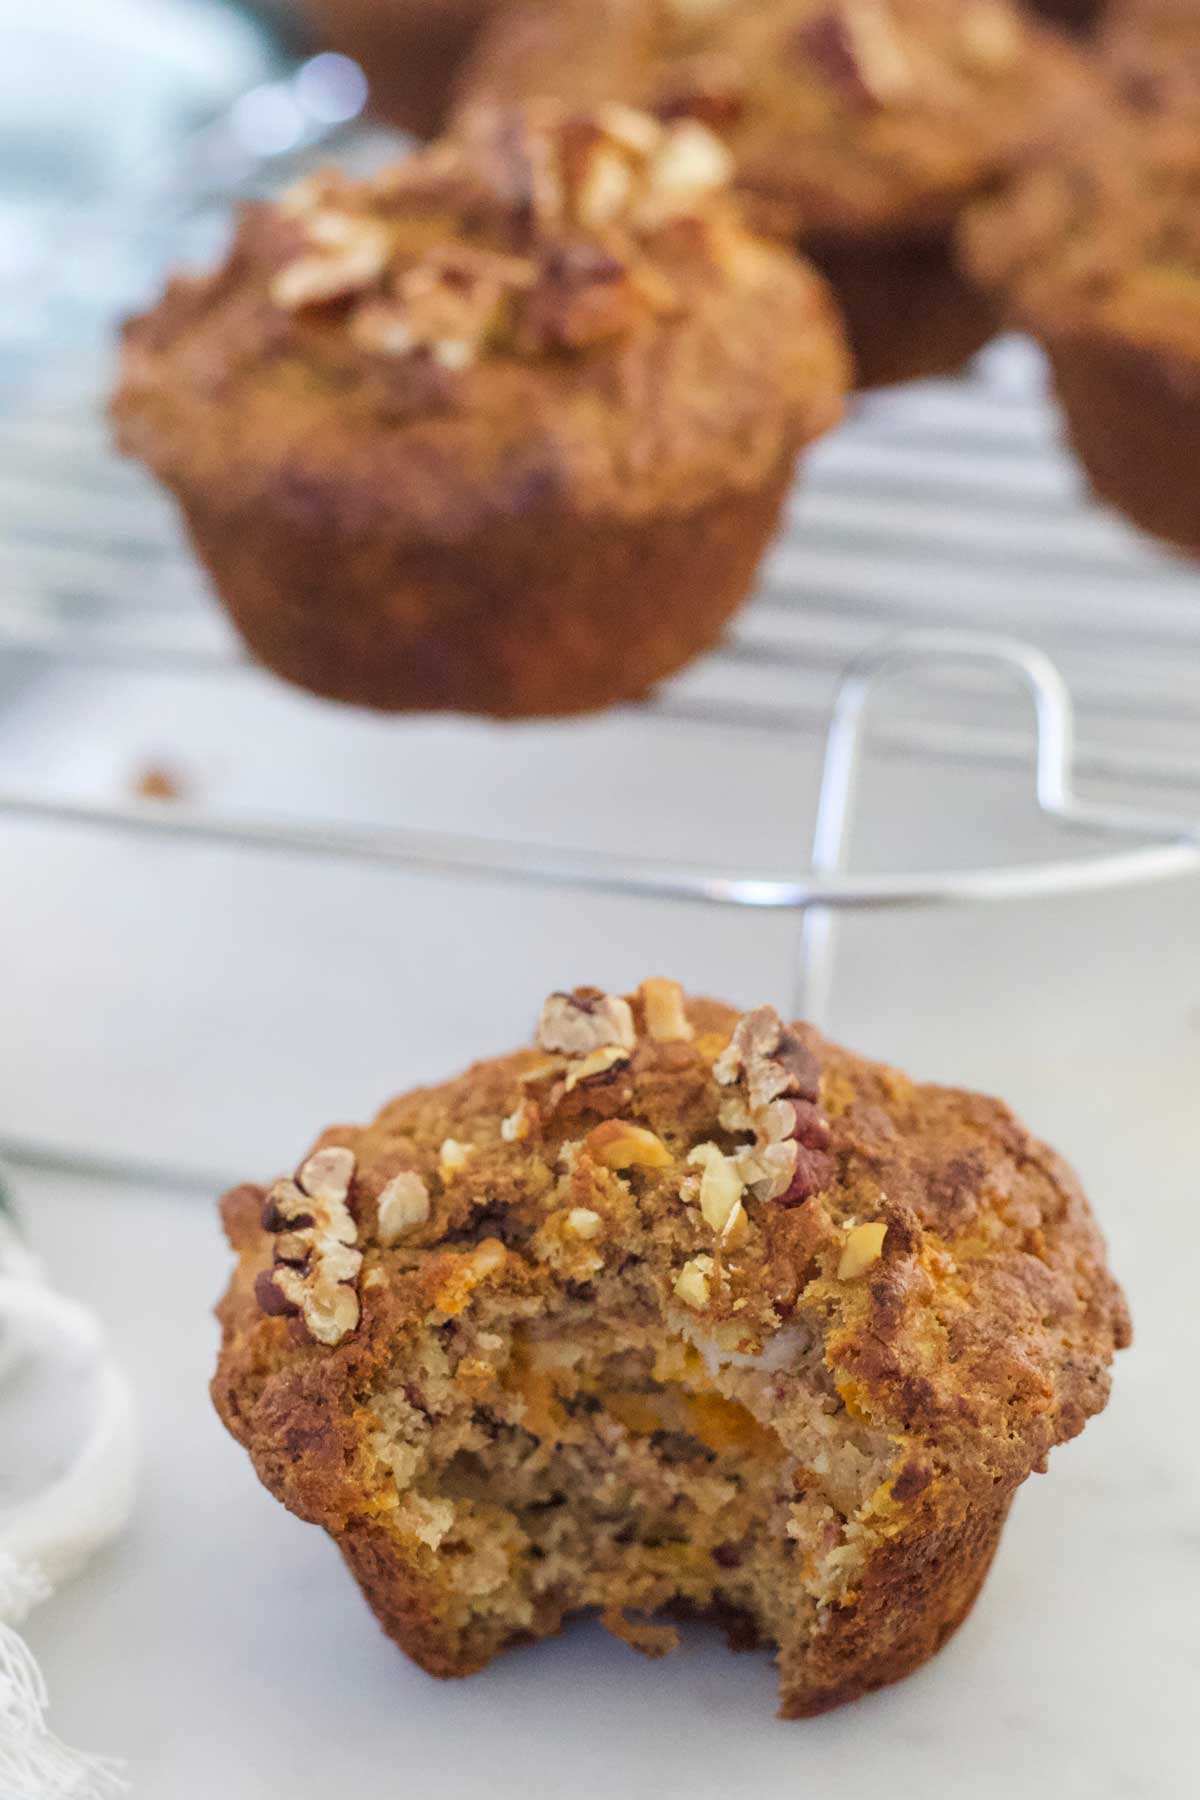 Close Up Shot of Carrot Muffin with Bite Taken Out